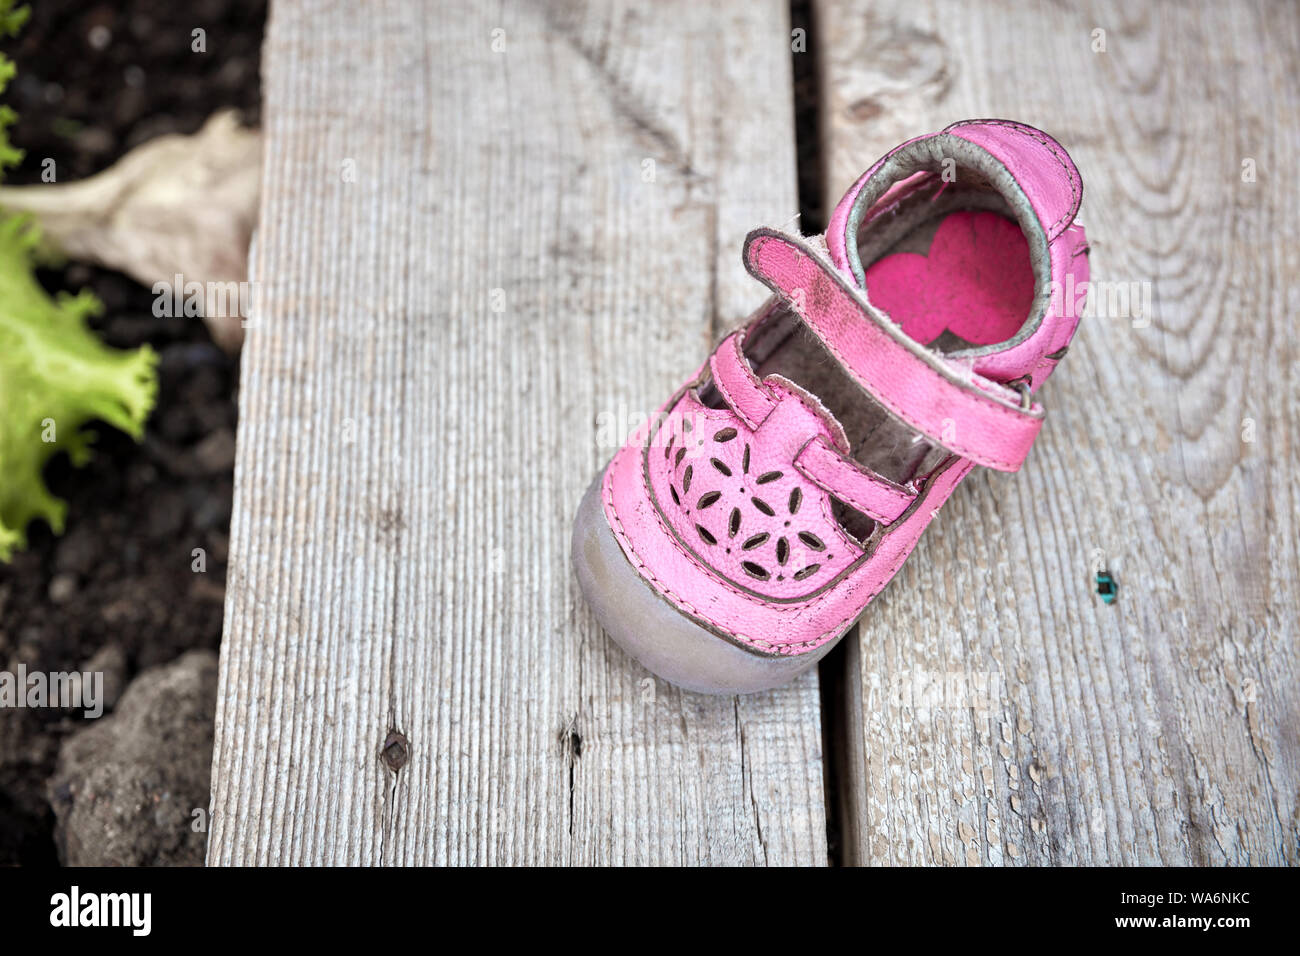 Worn pink children shoe on wooden plank background. Concept of child abuse or kidnapping or pedophilia. Stock Photo